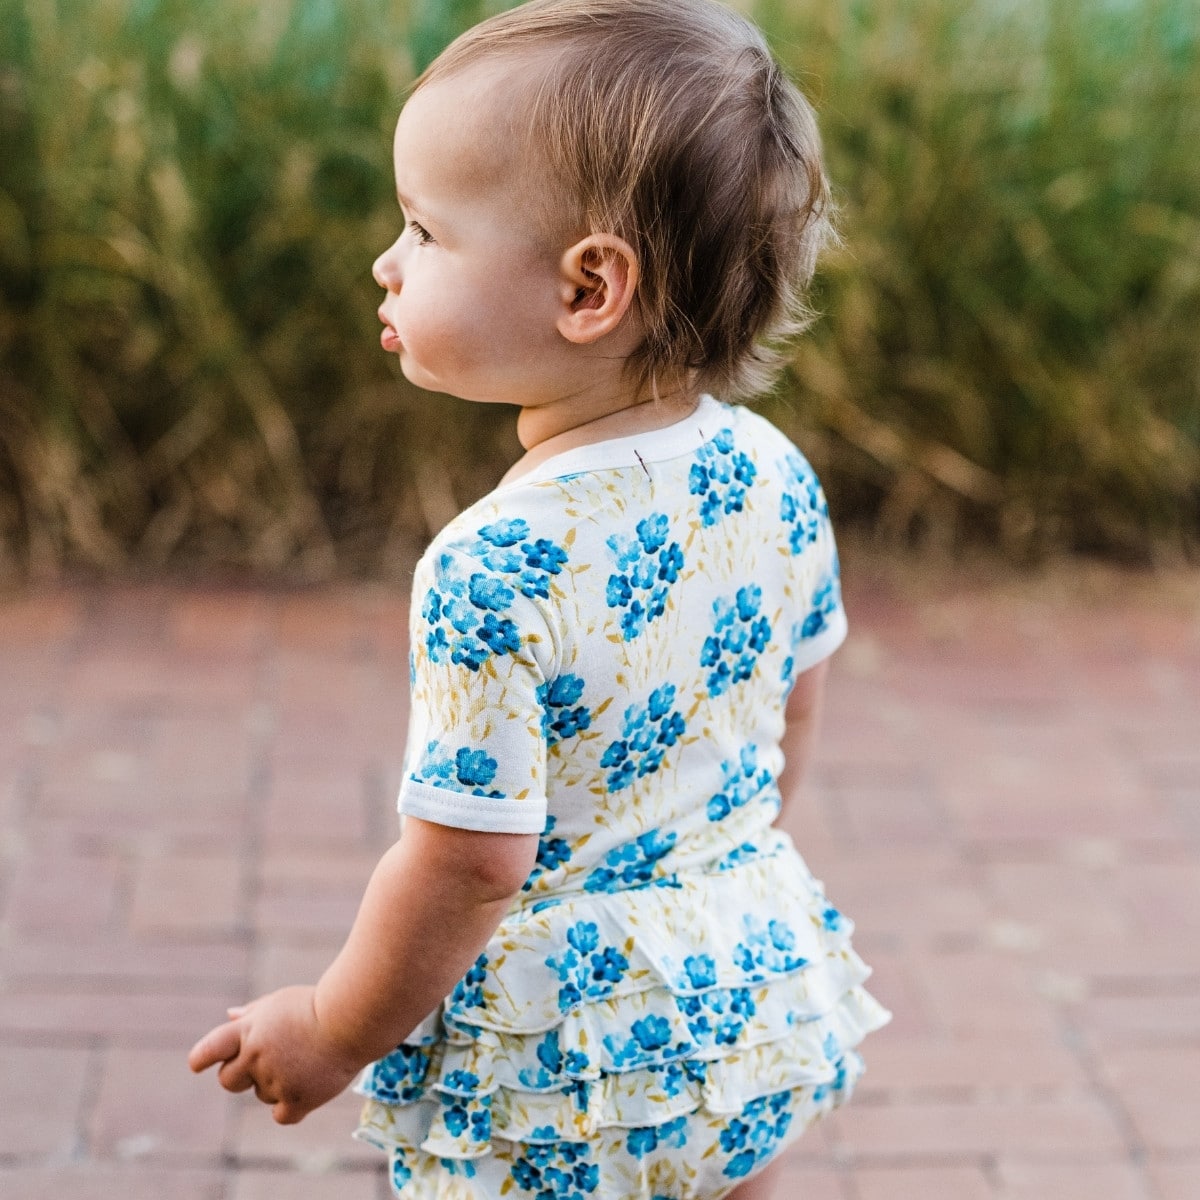 Baby girl outsideon a red brick path turned away wearing the Sky Floral Bamboo Short Sleeve One Piece and matching ruffle bloomers by Milkbarn Kids